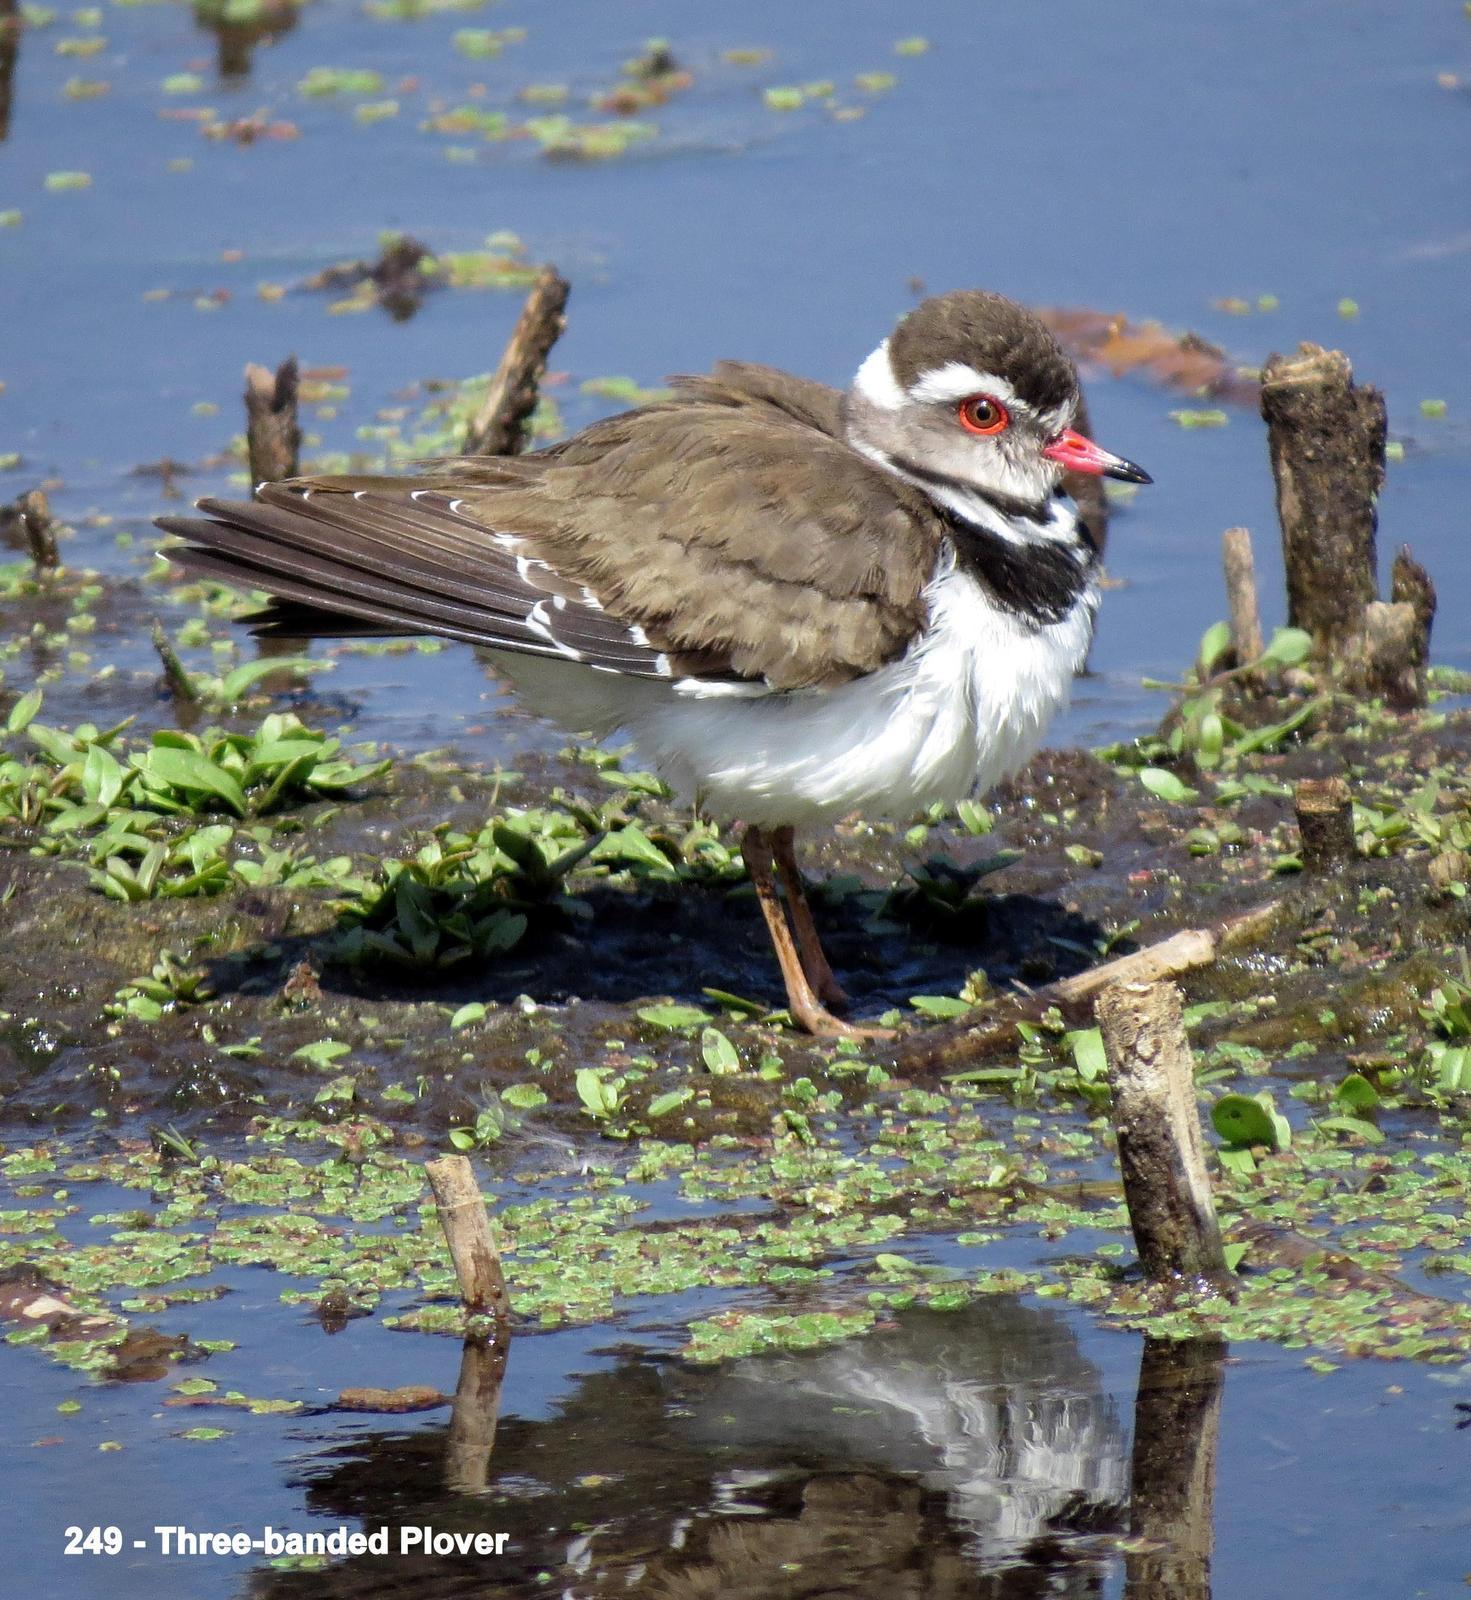 Three-banded Plover Photo by Richard  Lowe